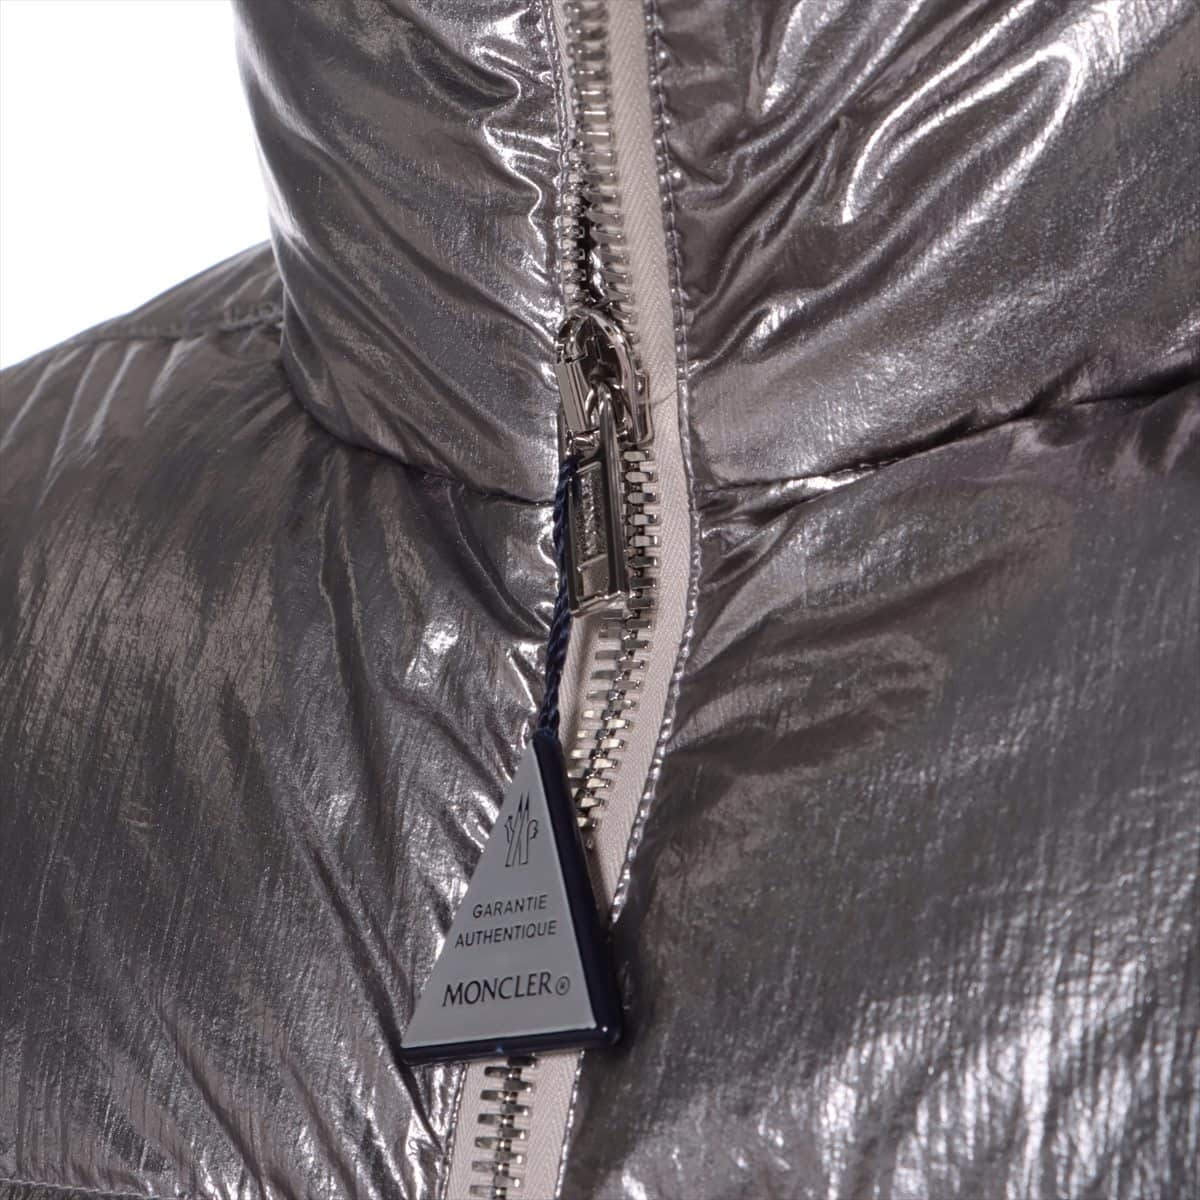 Moncler x Rick Owens 20 years Nylon Down jacket 2 Unisex Silver  CYCLOPIC